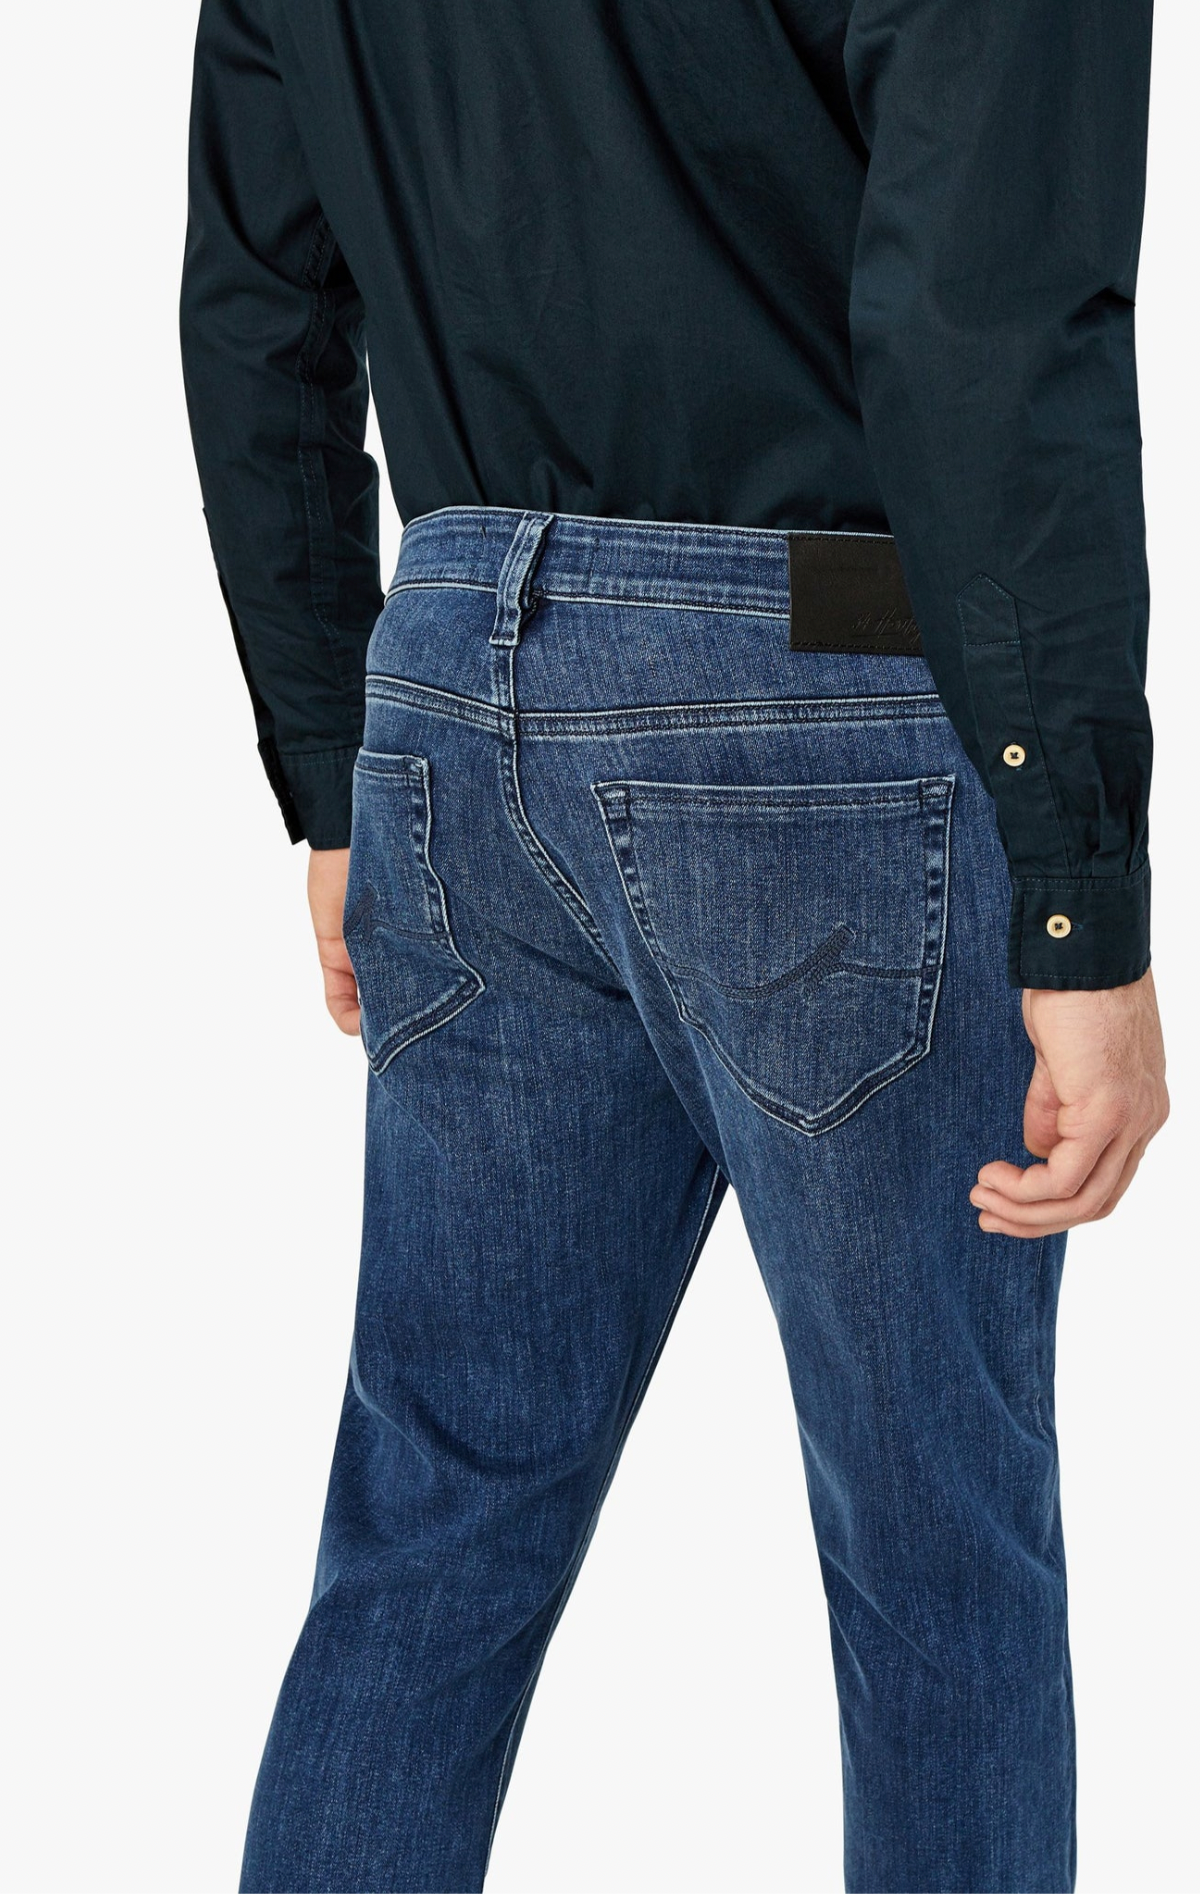 A contemporary fabrication complements the classic styling of this higher-rise, straight leg jean. They are cut from premium stretch denim that has a distinguished, modern appearance in a versatile wash to easily transition from casual to semiformal. Designed with comfort and effortless wear in mind, these have a relaxed fit through the leg that’s tailored to eliminate excess fabric at the hip and thigh.